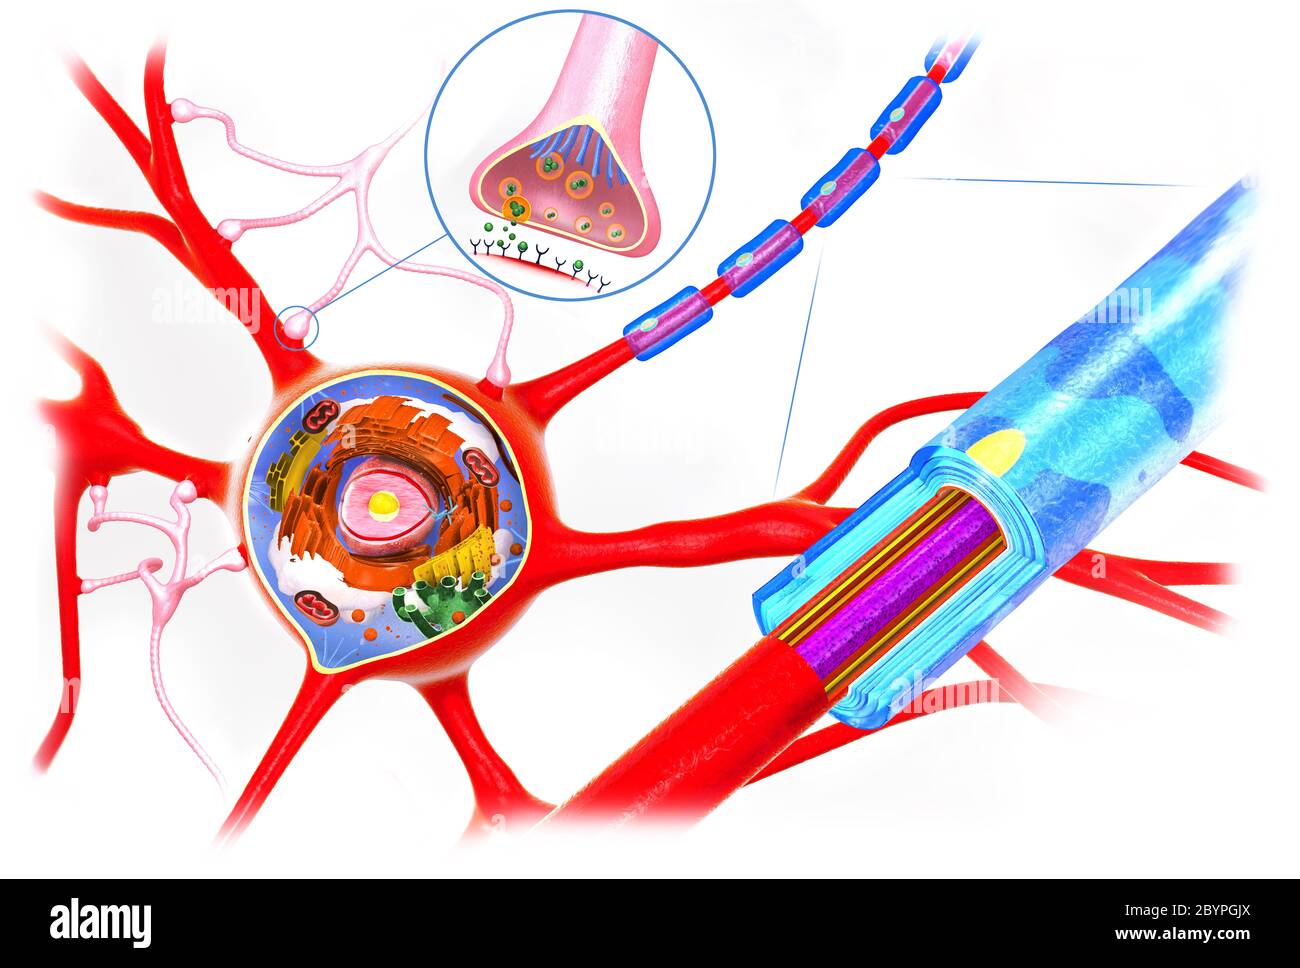 Cross section of a neuron, function and cell-building - 3d illustration Stock Photo